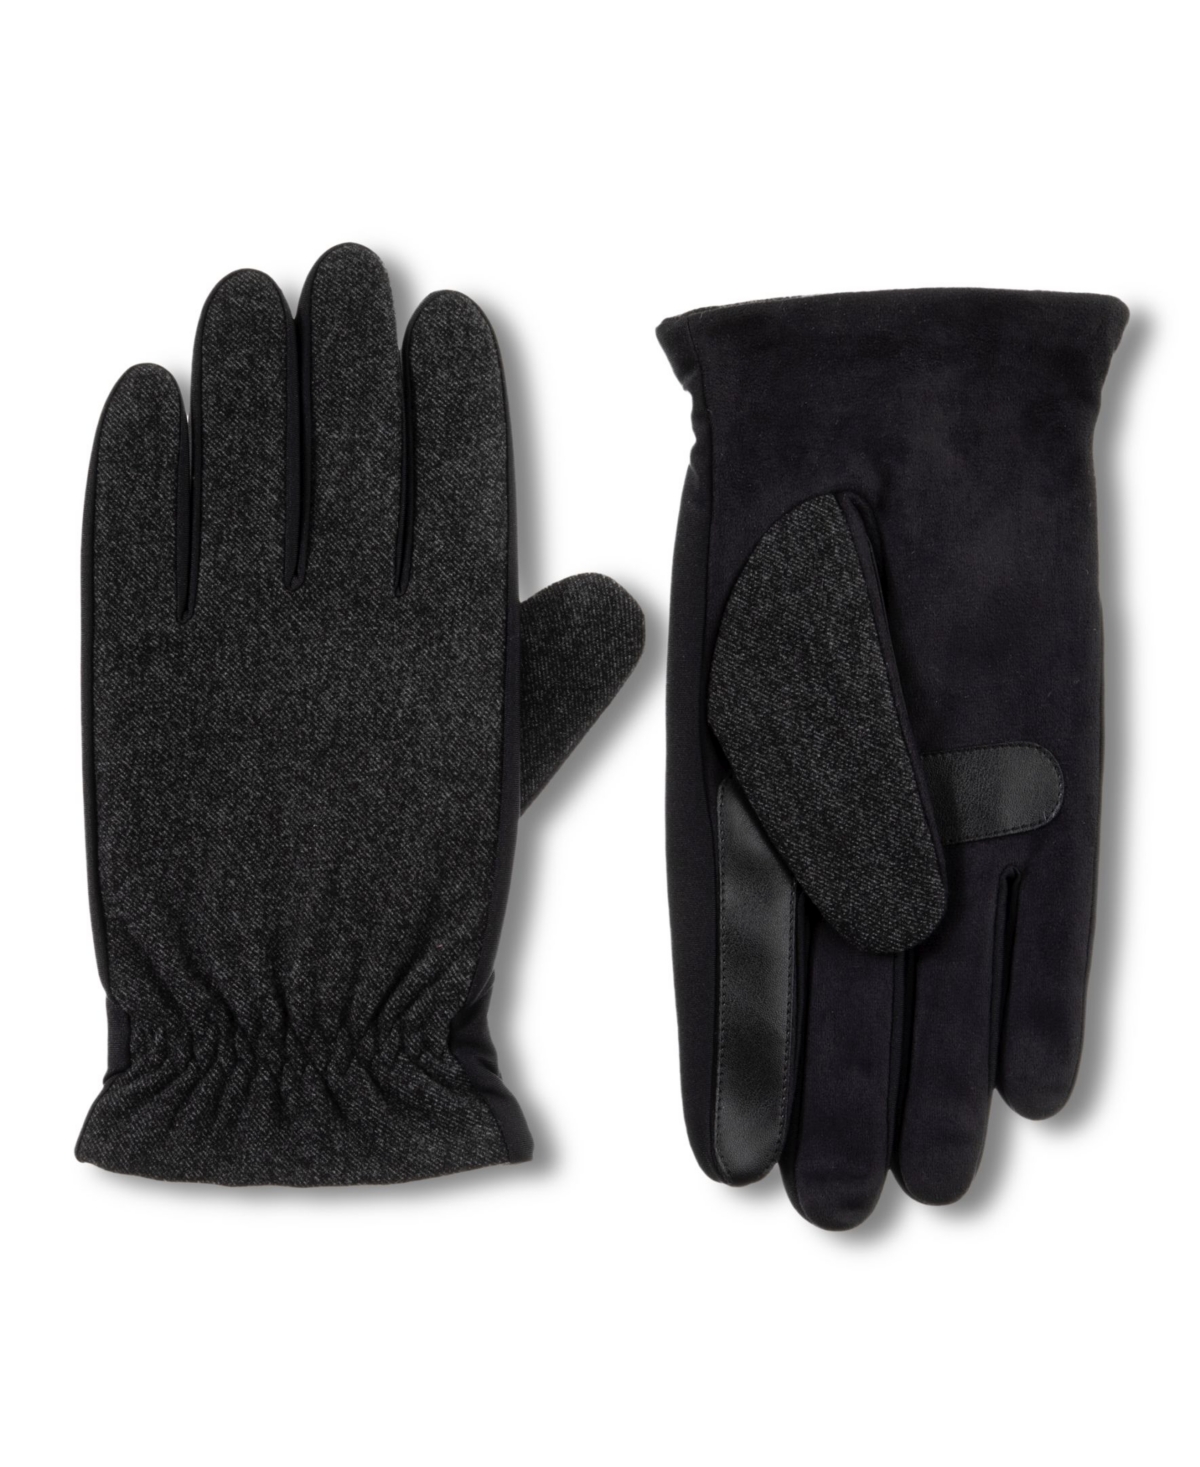 Isotoner Men's Lined Casual Touchscreen Gloves - Dark Charcoal